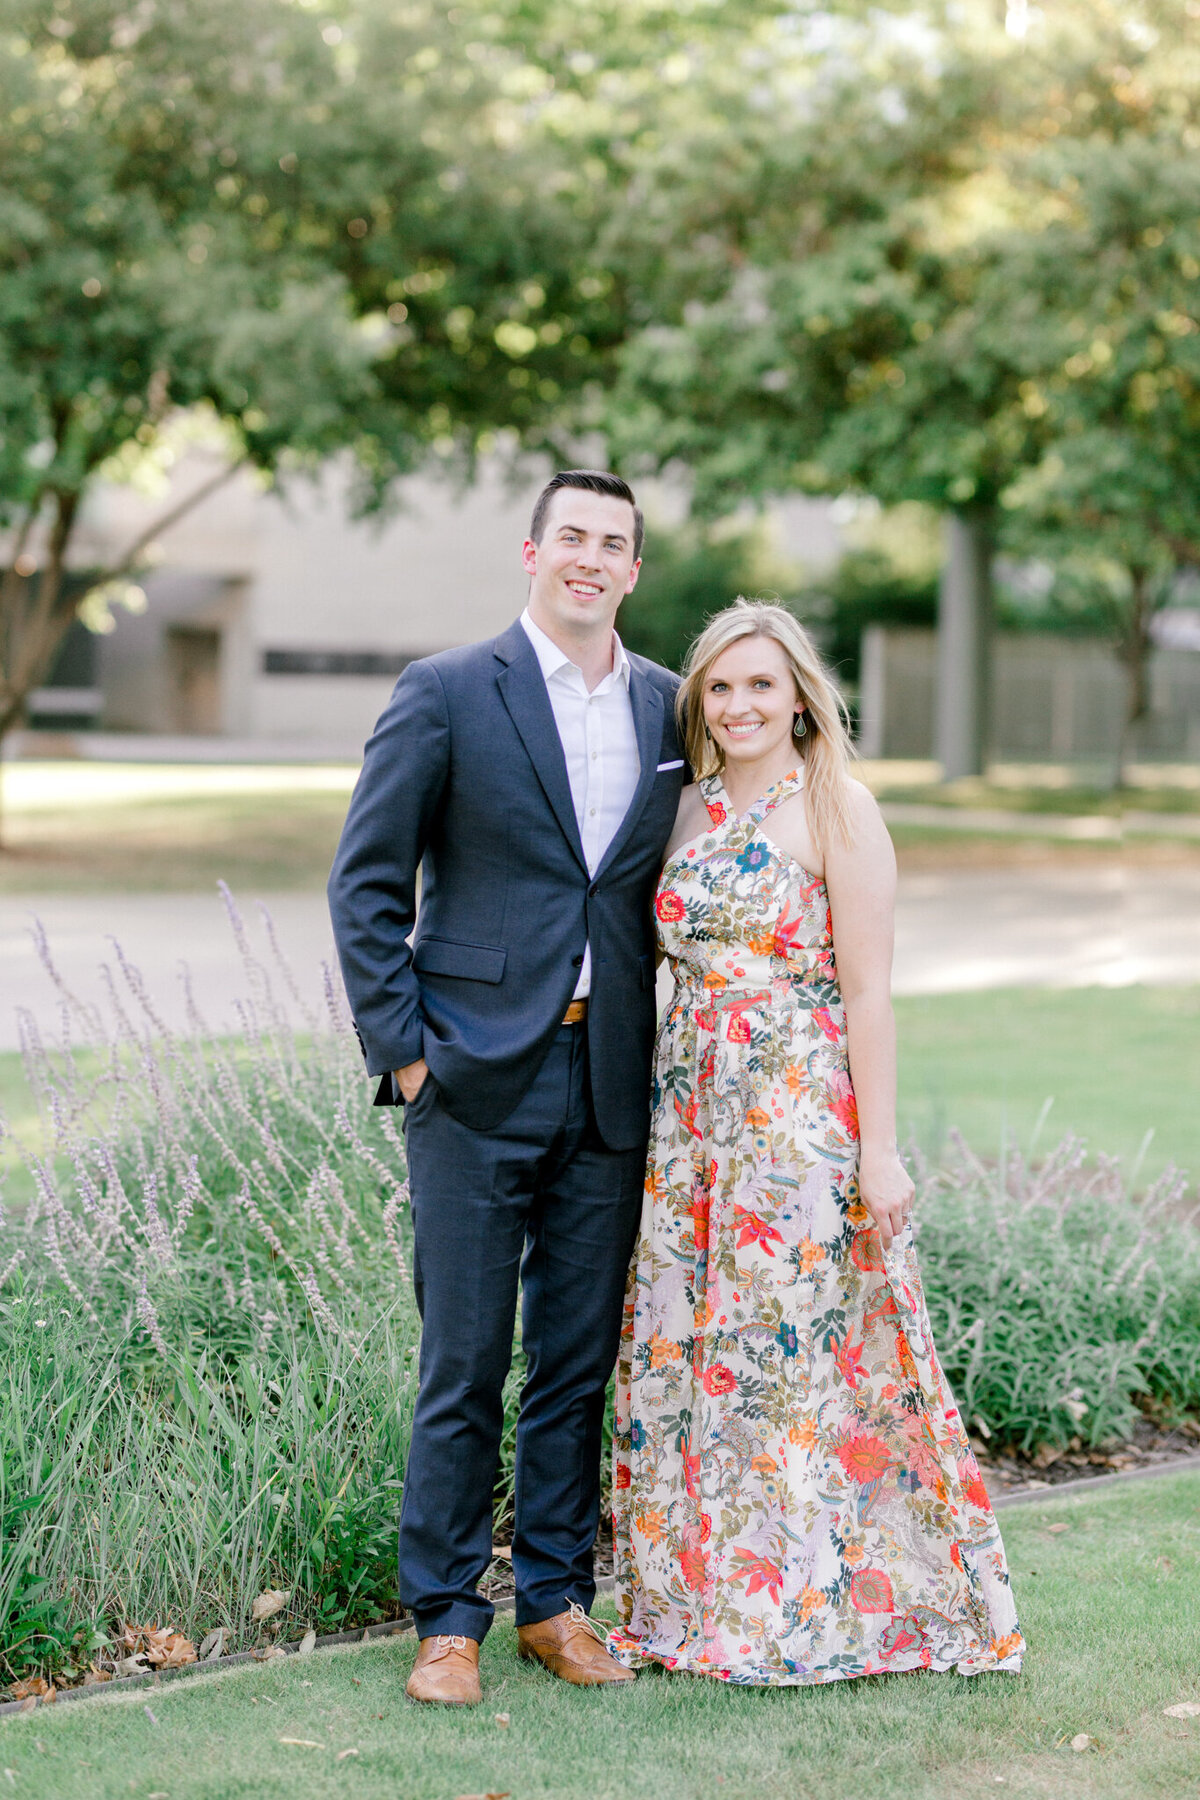 Montanna & KC Engagement Session at the Dallas Arts District | DFW Wedding Photographer | Sami Kathryn Photography-5